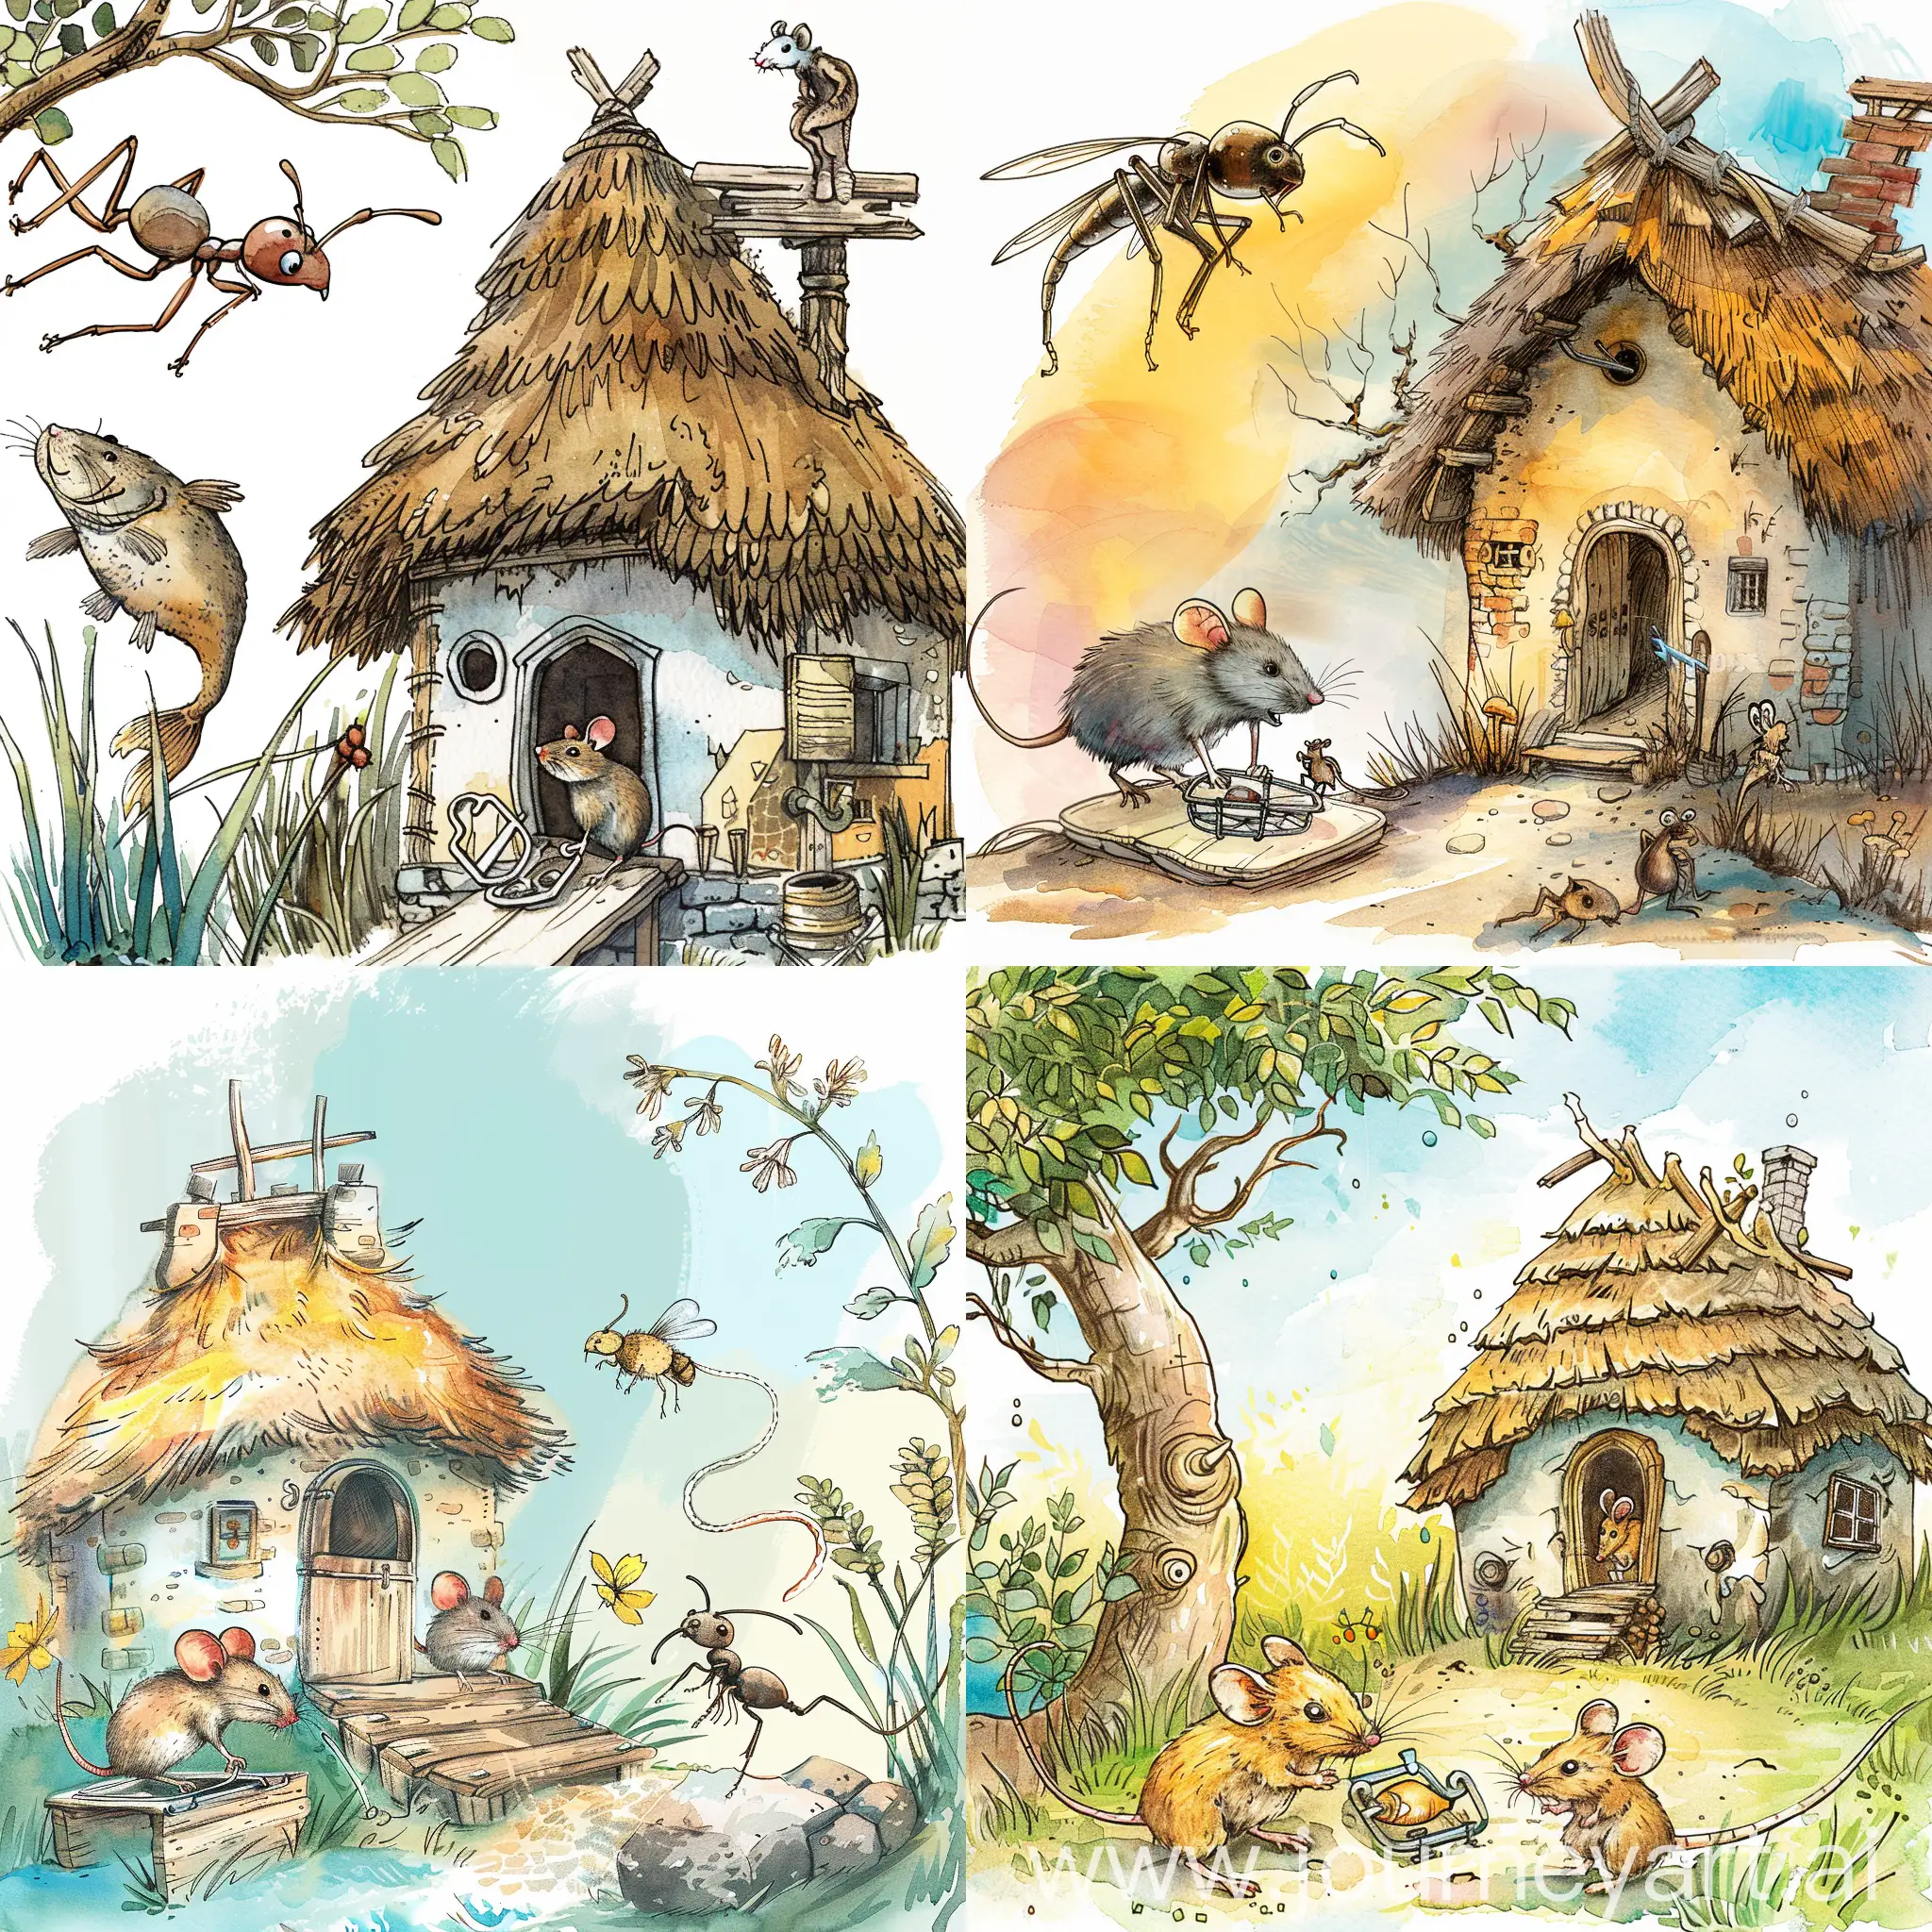 Minimalistic drawing sketches, this fairy tale-inspired period features a mouse (in focus), a thatched house, ((fish in a mousetrap and a trapped mouse)) (zoom in), a weasel nearby, a sneering ant, a bright and colourful background design, and whimsical characters to capture the attention and spark the imagination of young readers. Simple, Illustration, Watercolour, Rough, webtoon style